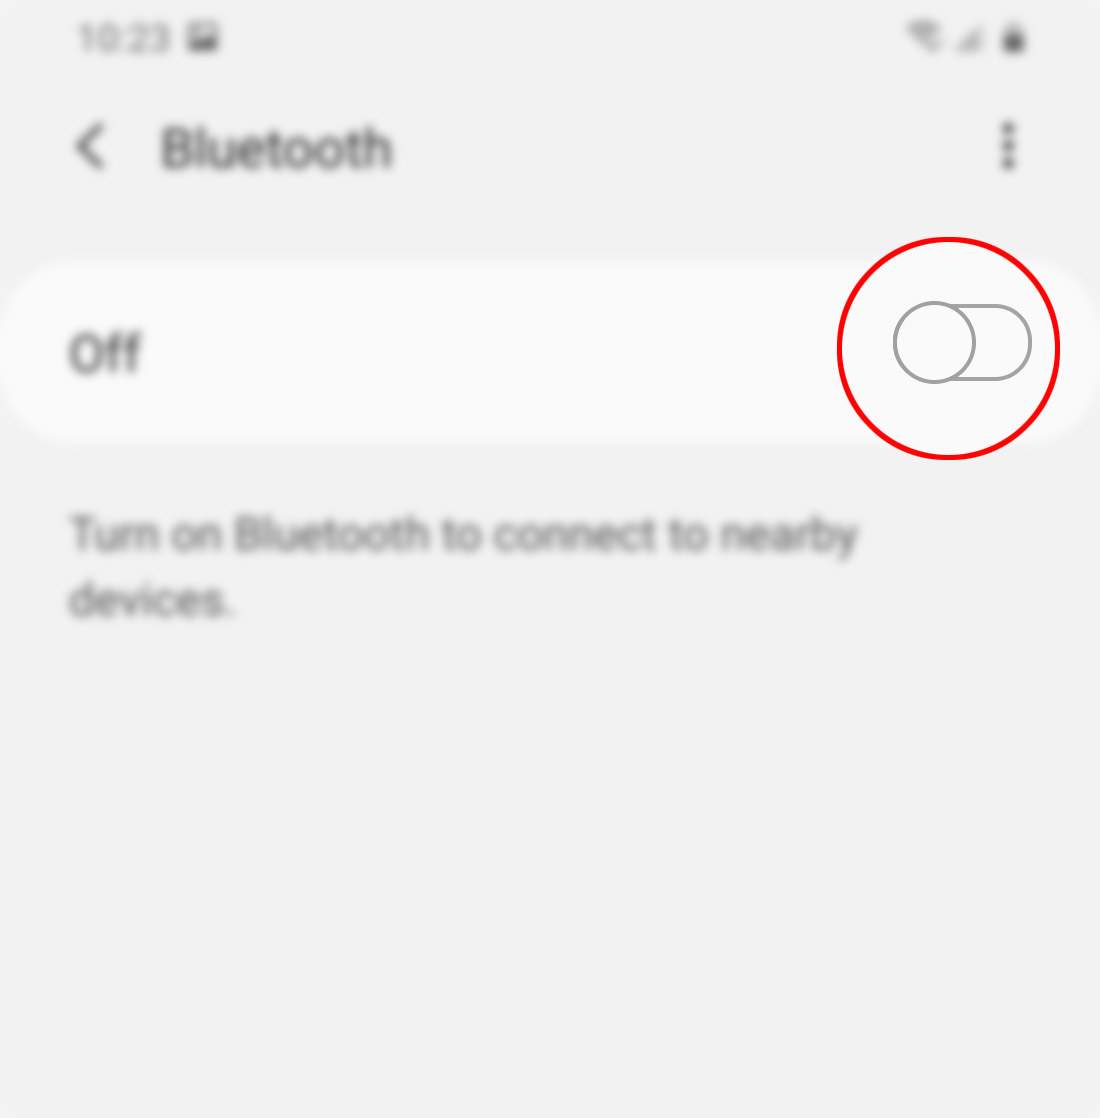 fix galaxy s20 low audio during calls - disable bluetooth